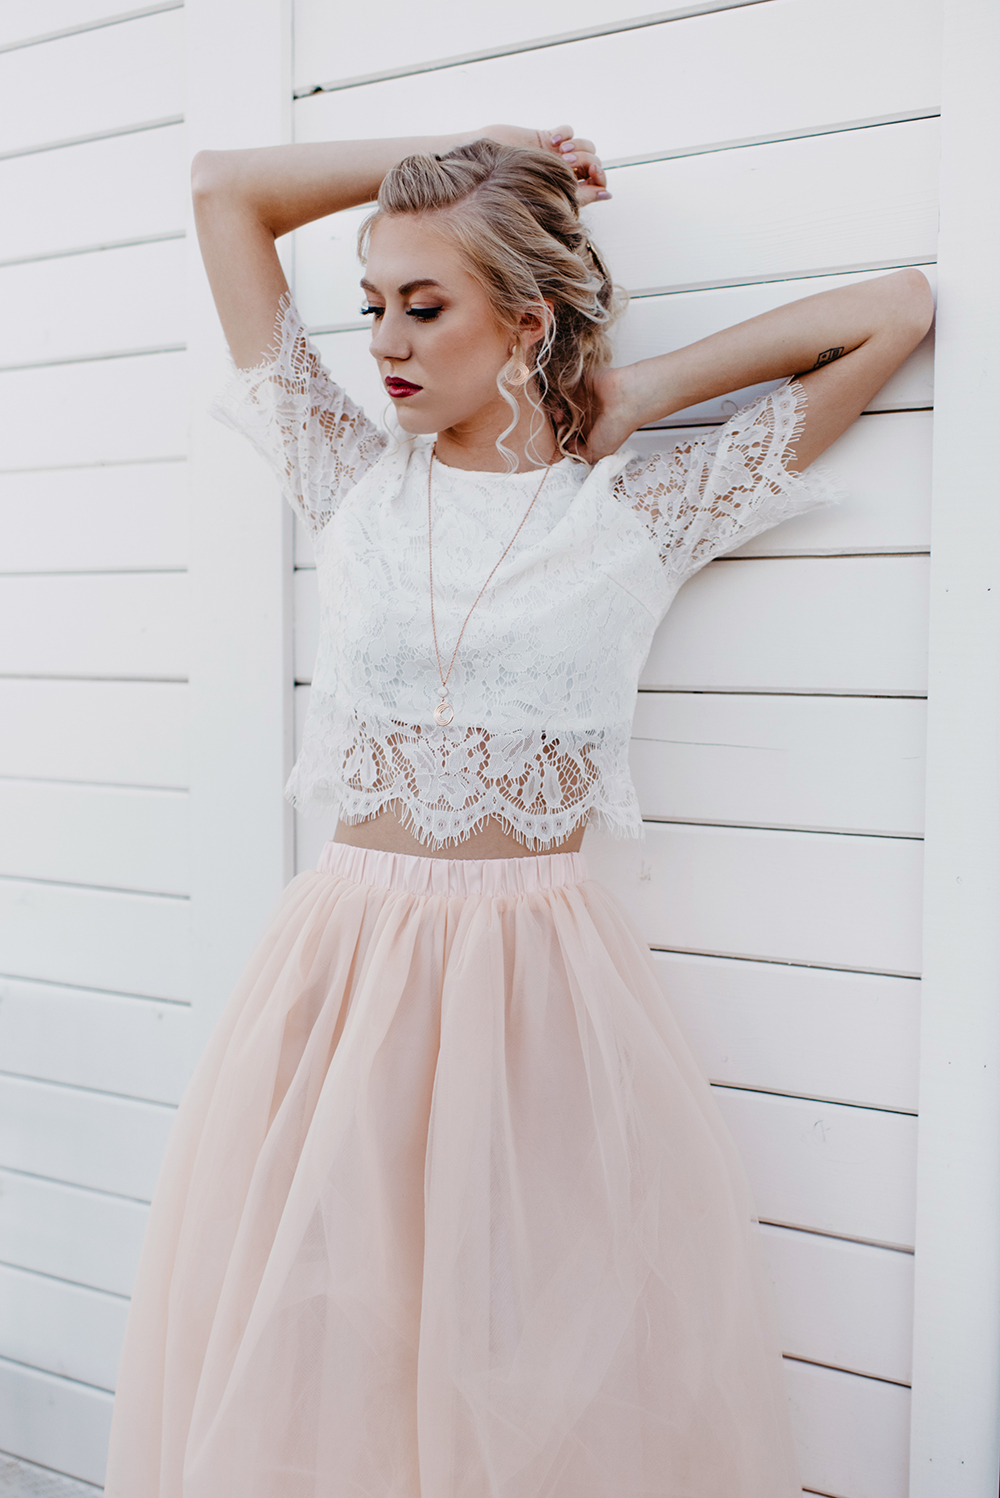 Her wedding ensemble was a white lace crop top and a blush maxi skirt